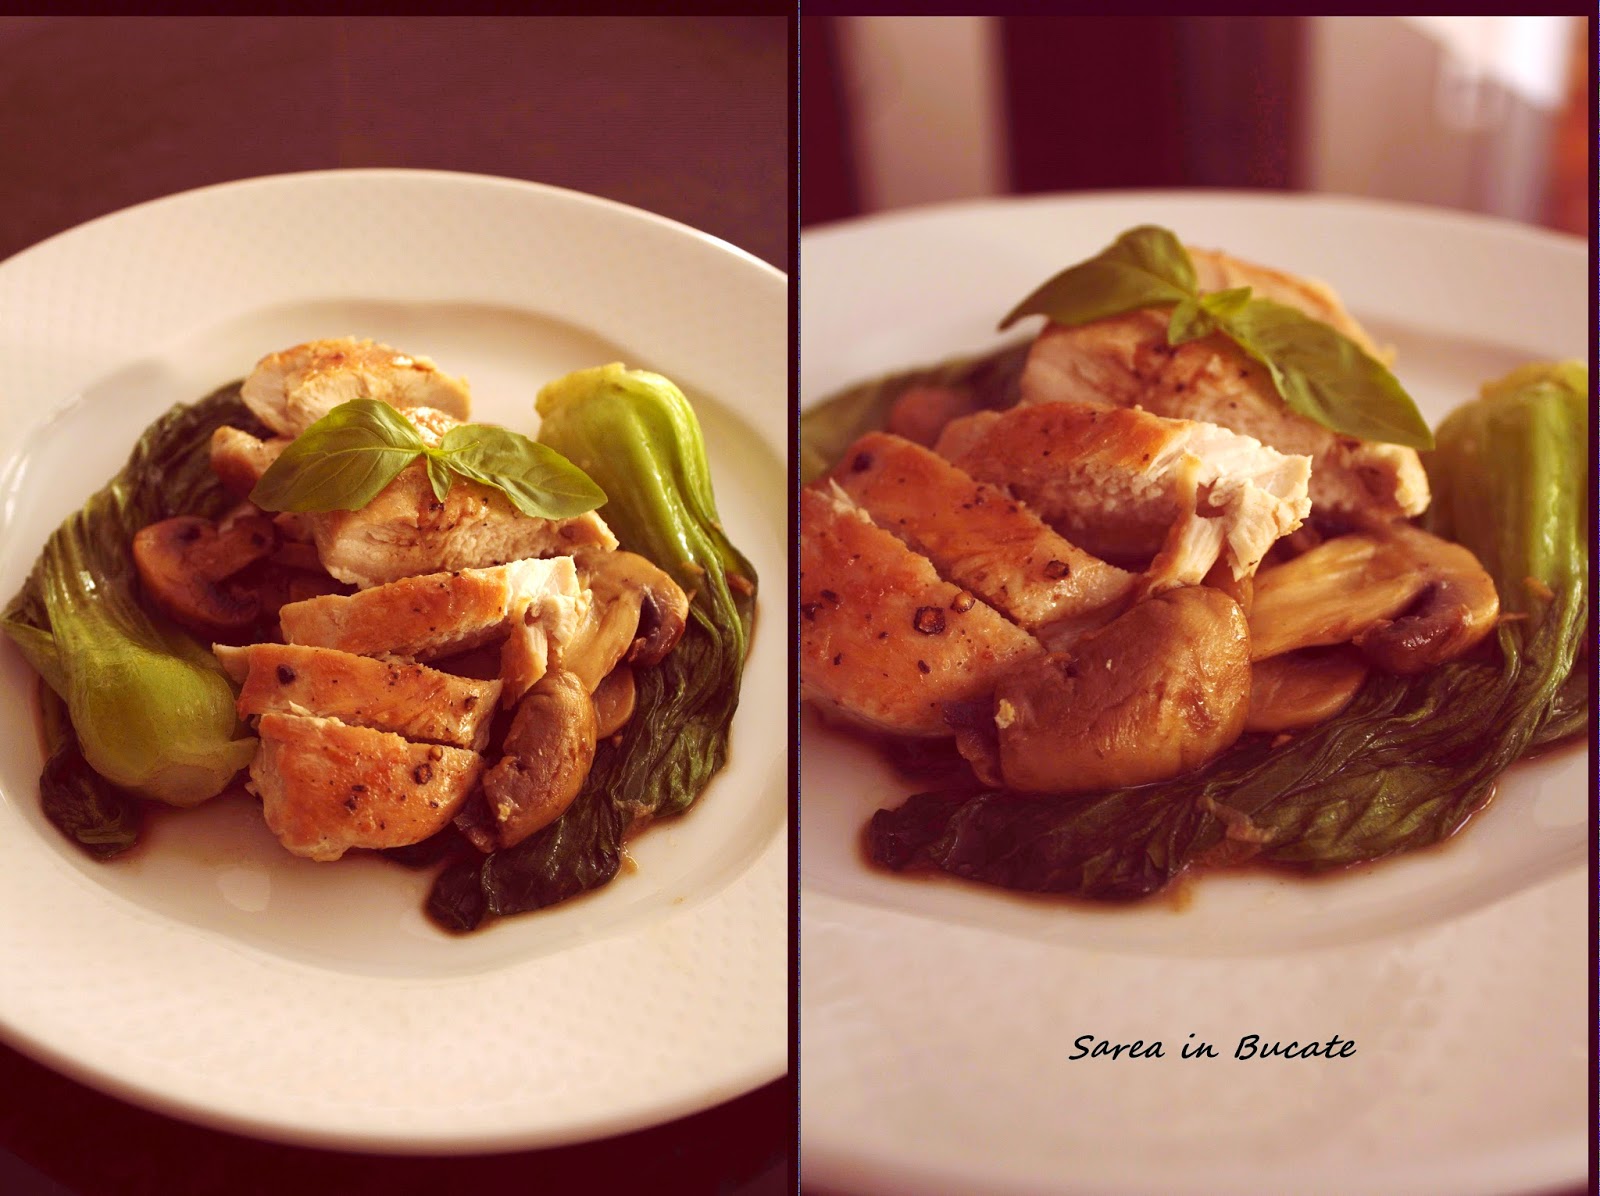 Piept de pui cu ciuperci sote si varza chinezeasca(Bok Choy) / Chicken breast with mushrooms and bok choy